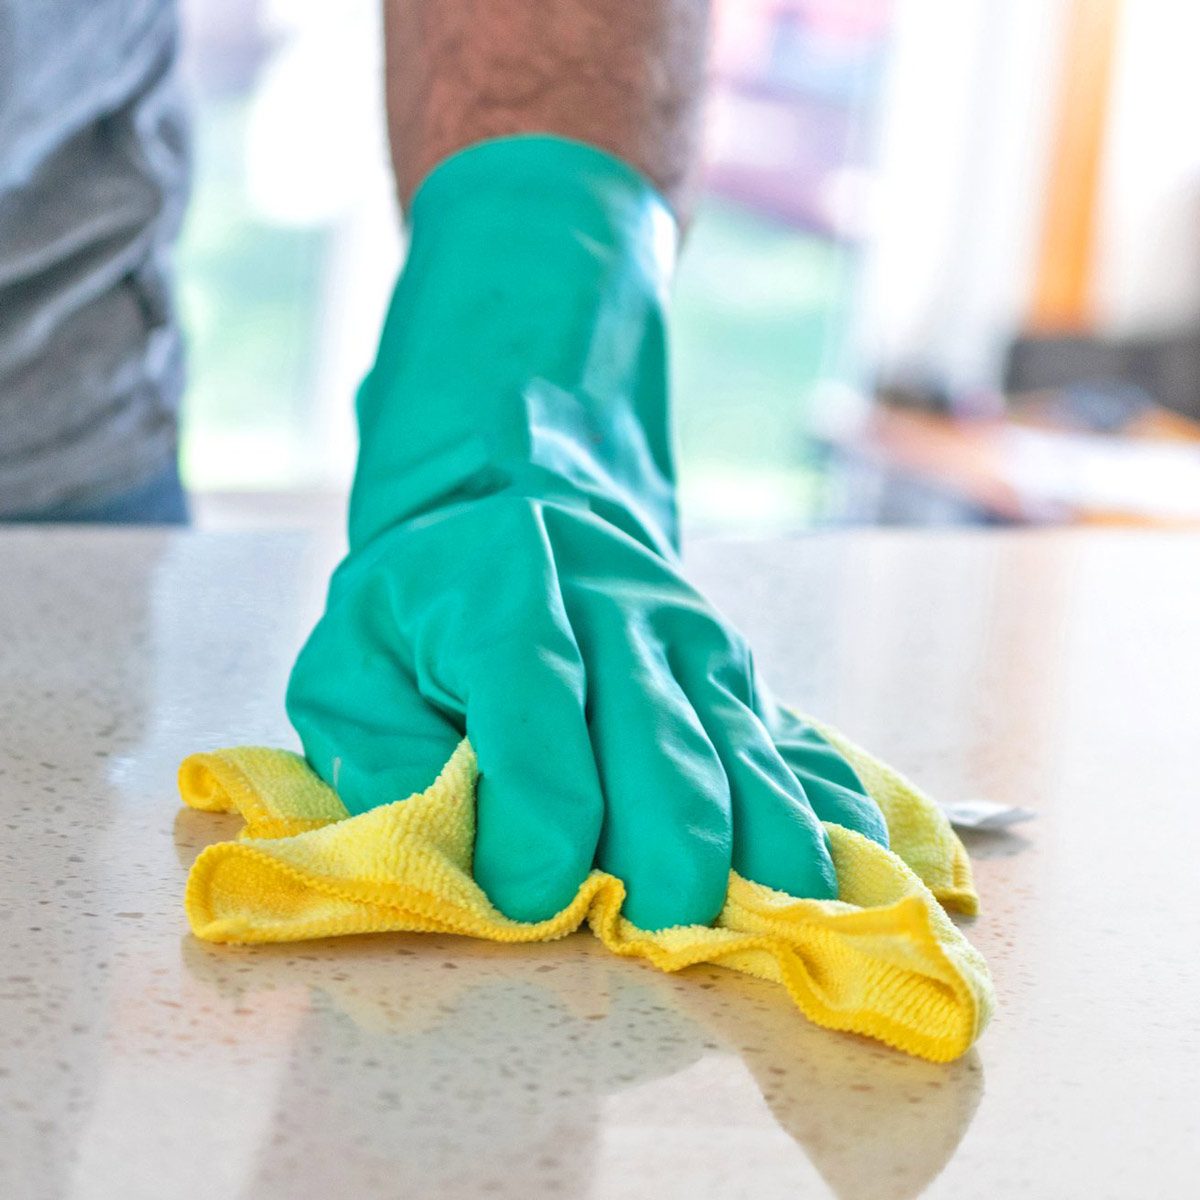 cleaner a-hand-wiping-table-surfaces